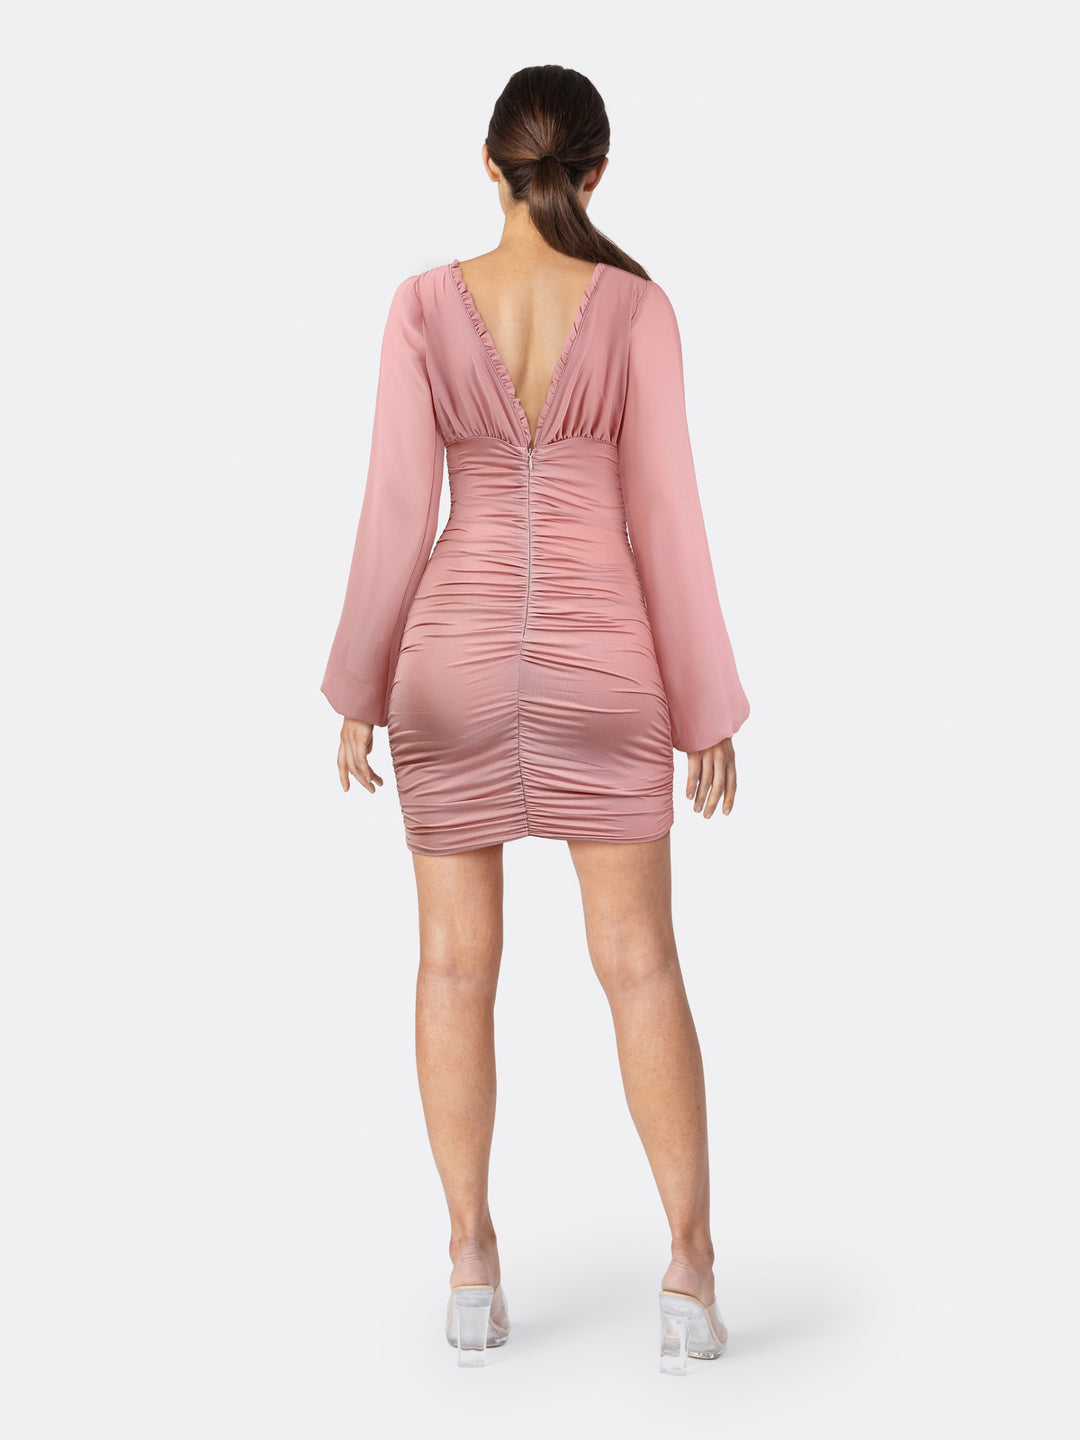 Long Sleeve Bodycon Dress Featuring Adjustable Draping Deep V Neck and Ruched Open Back Pink Back